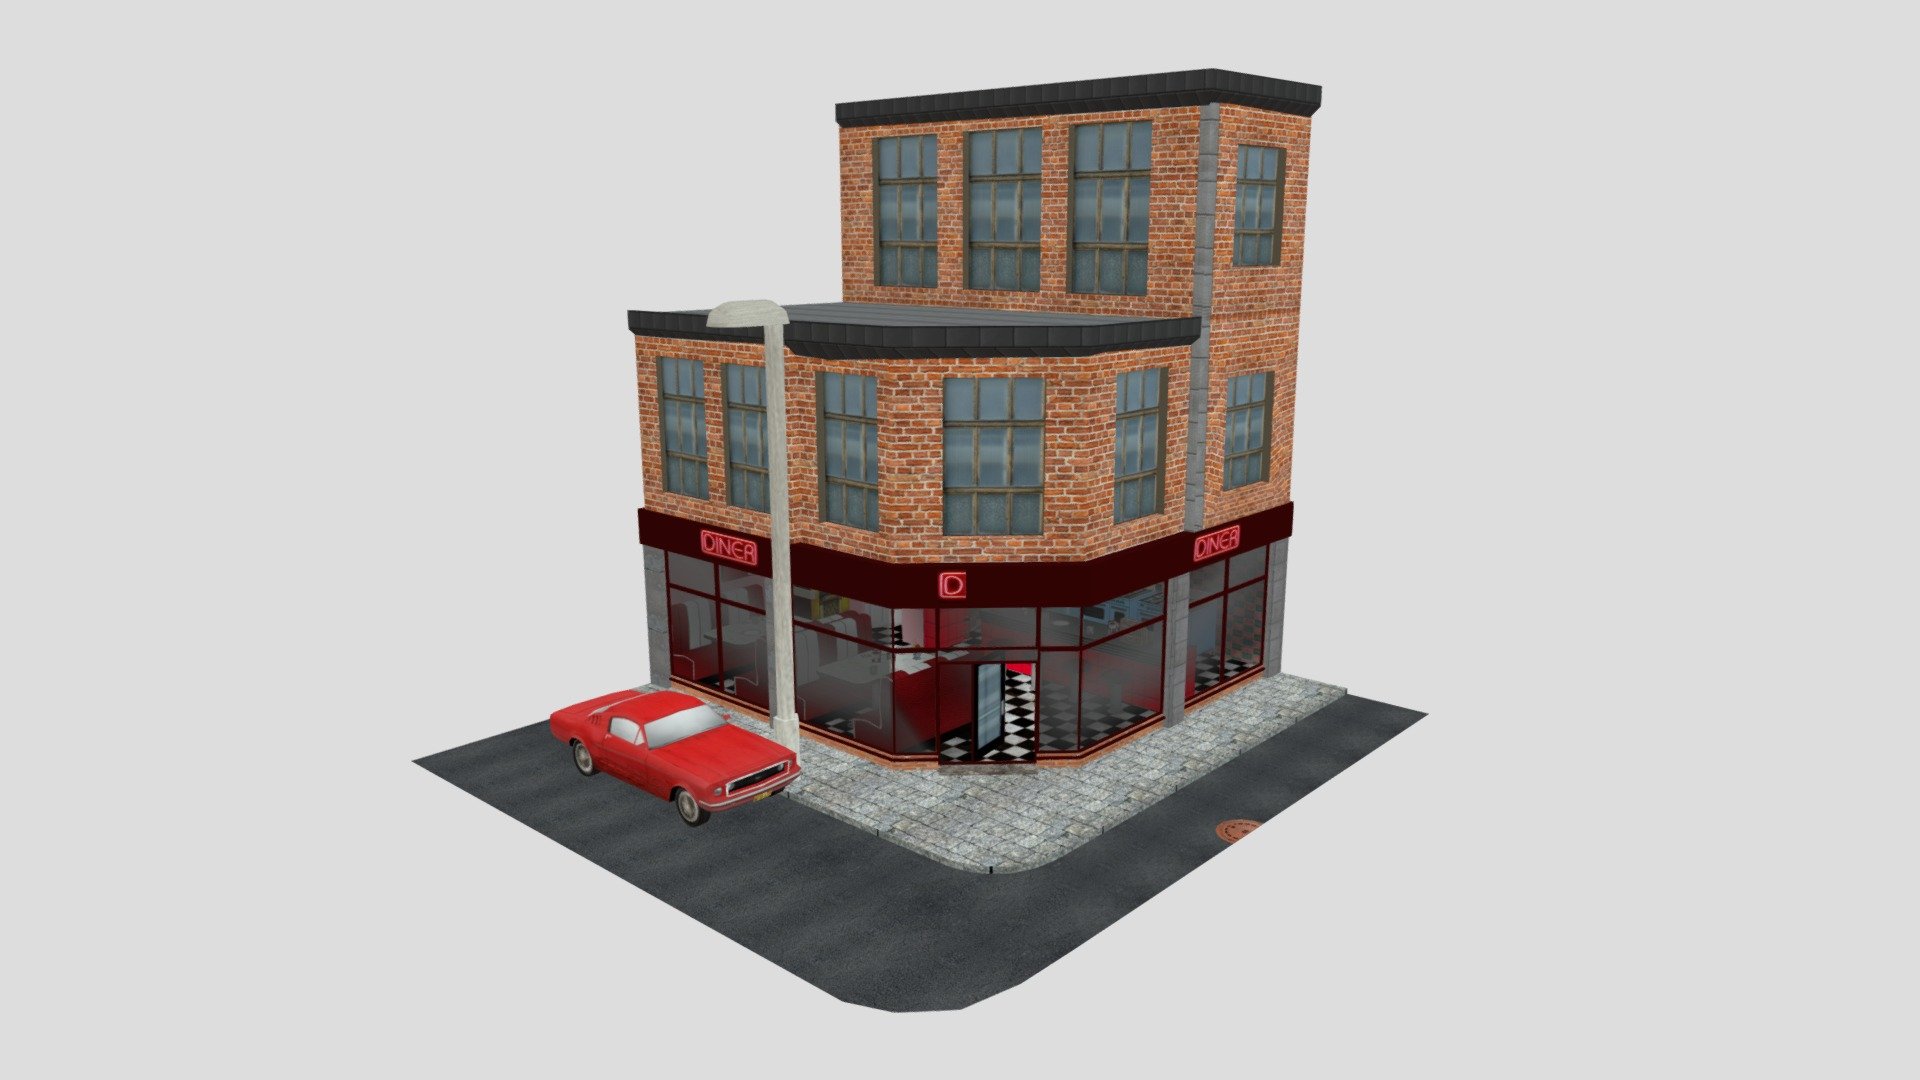 A Diner Building I created for a university project 3d model